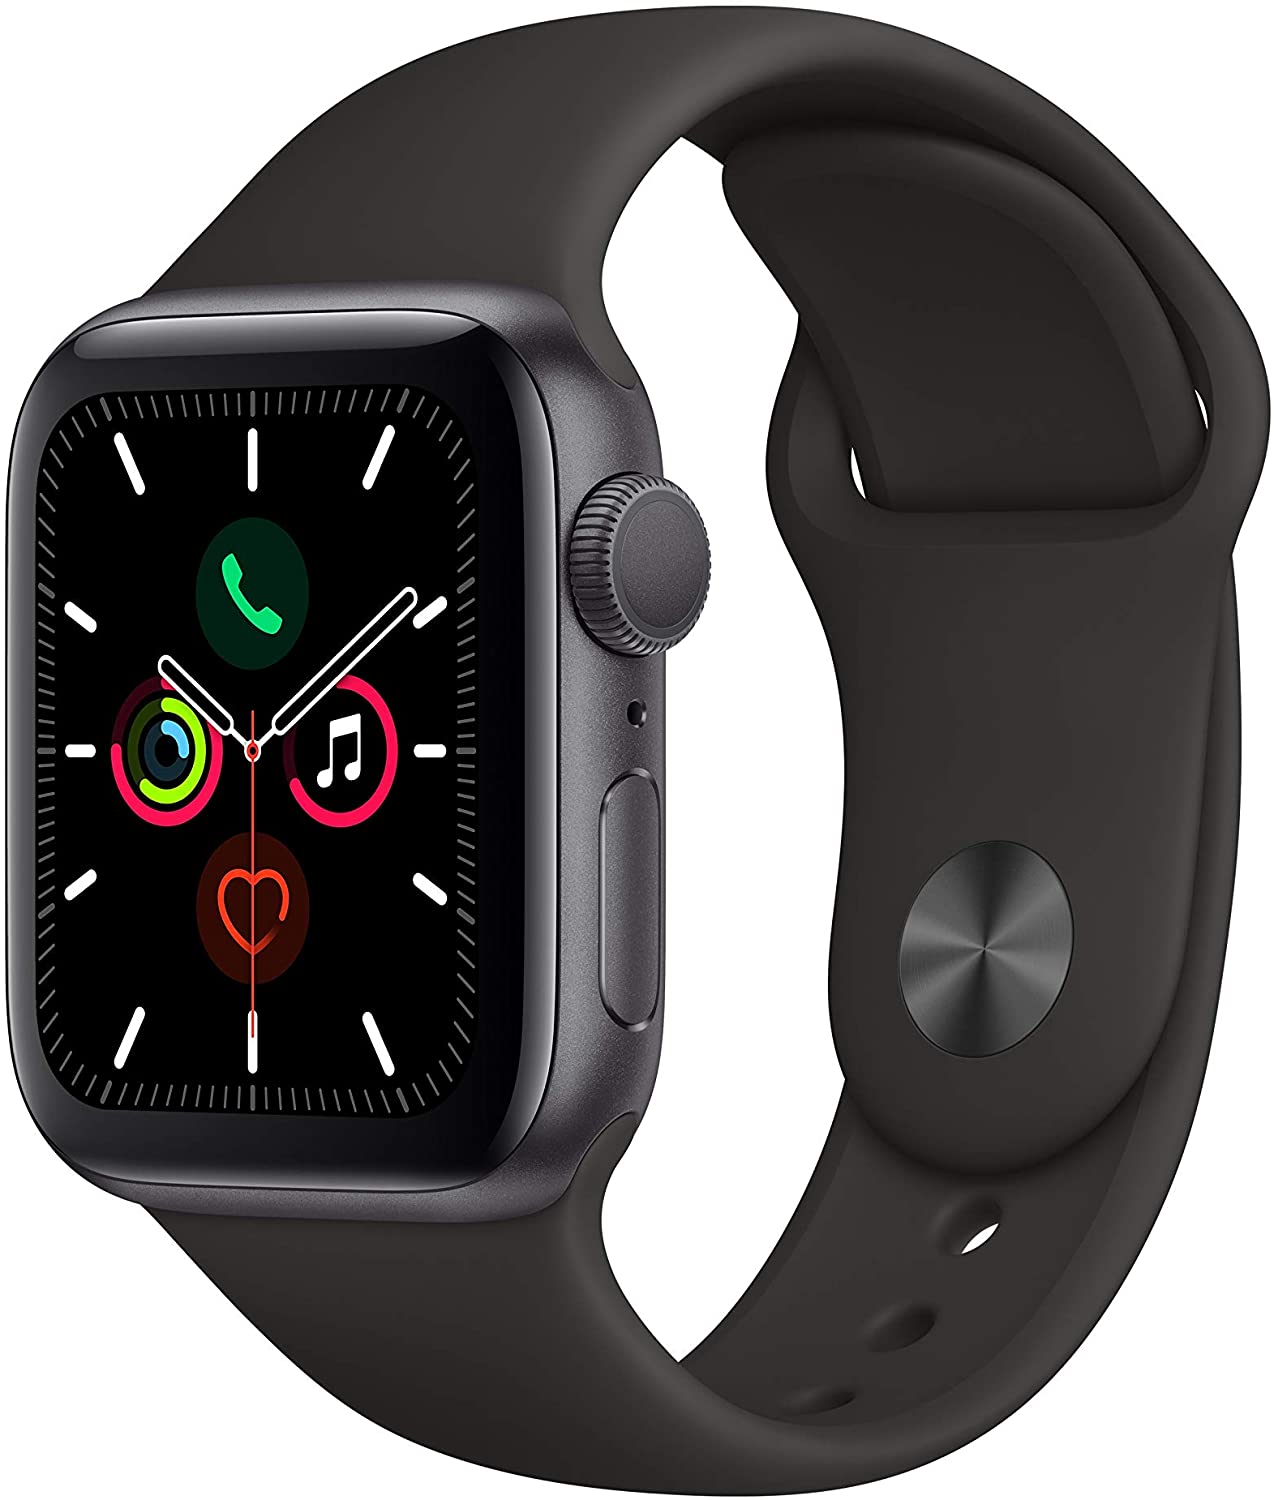 Apple Watch Series 5 Space Gray Aluminum Case with Black Sport Band